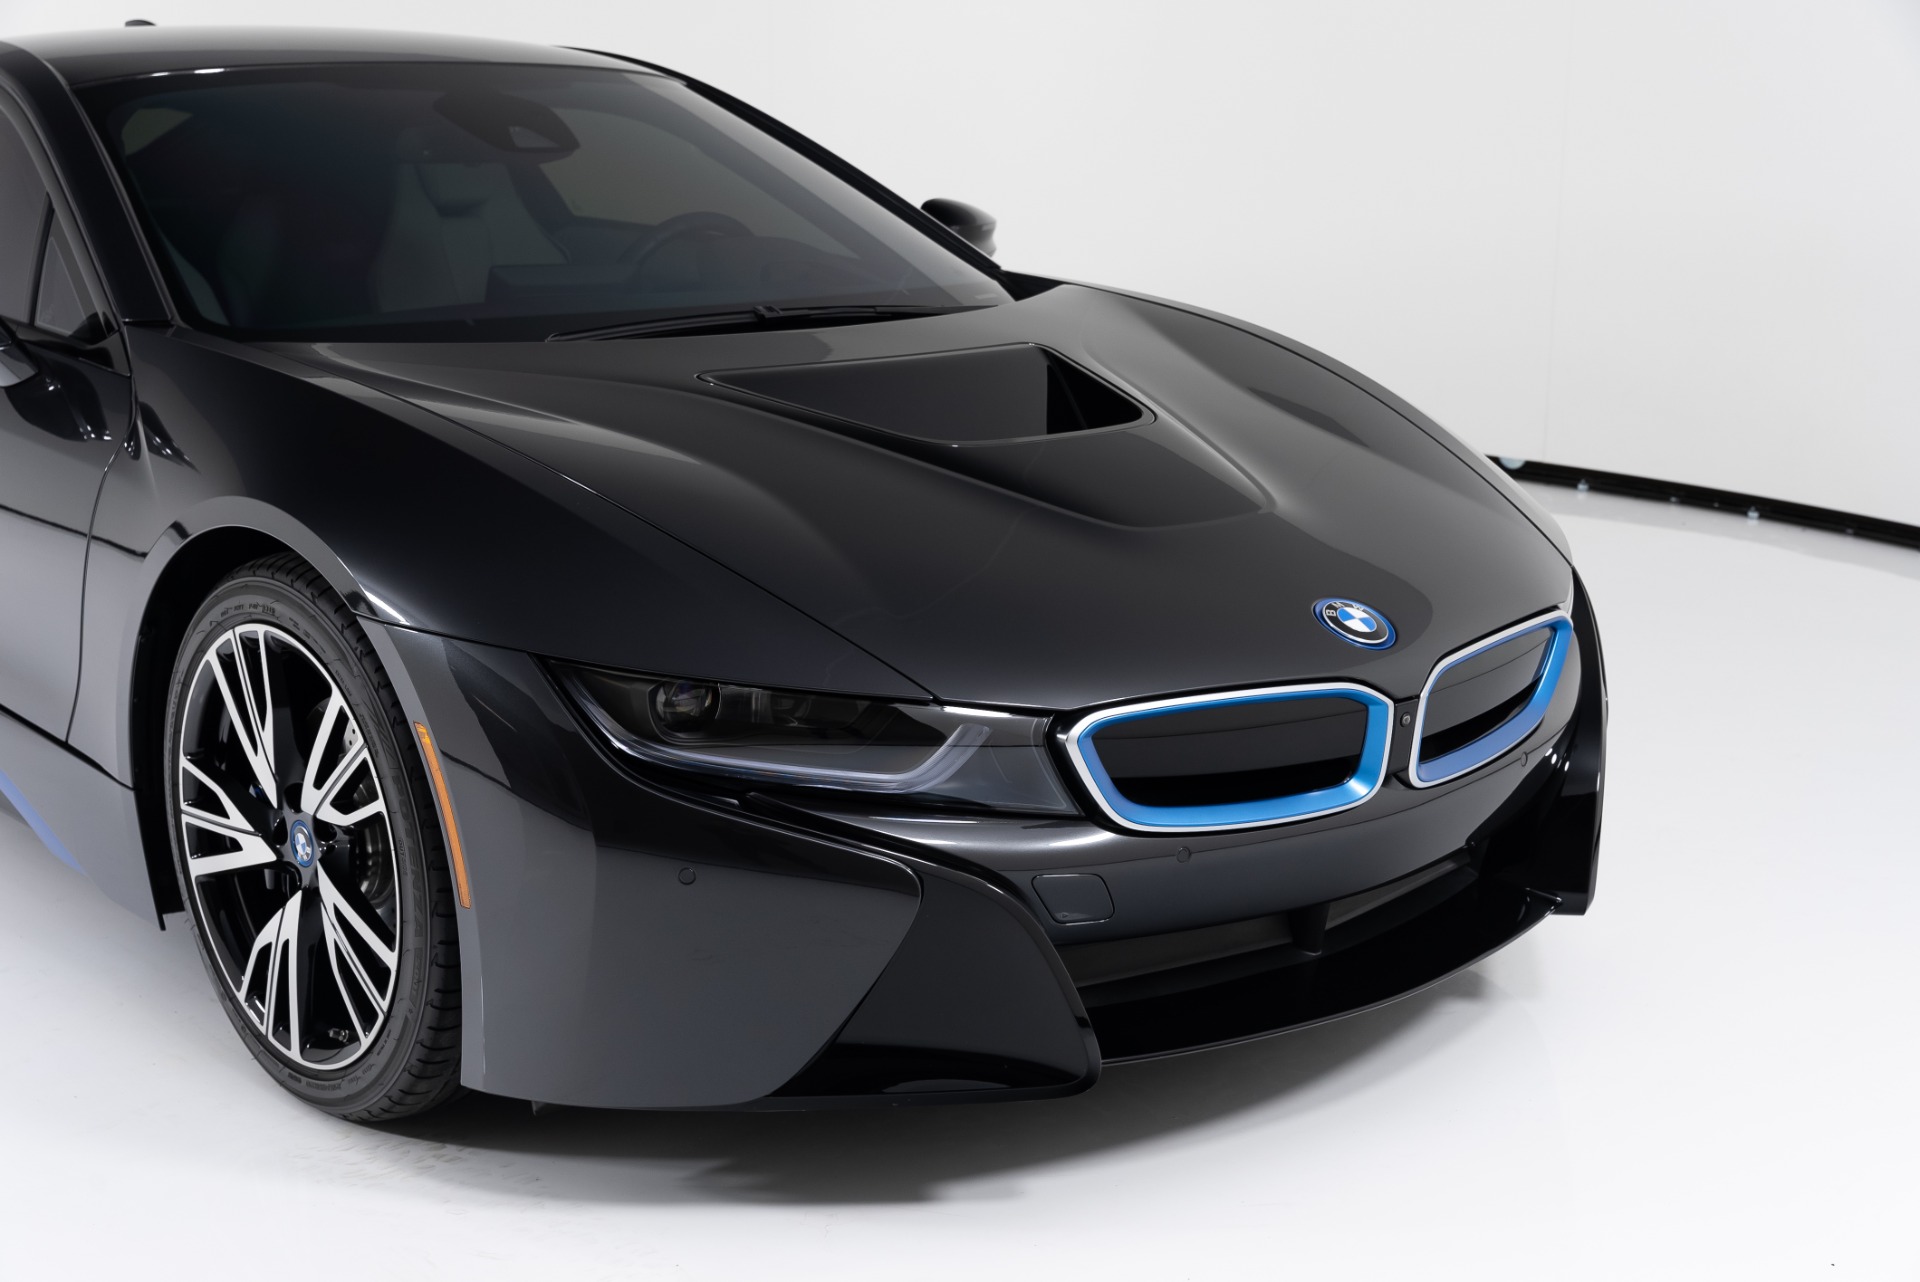 Used 2015 BMW i8 For Sale (Sold)  West Coast Exotic Cars Stock #C2302